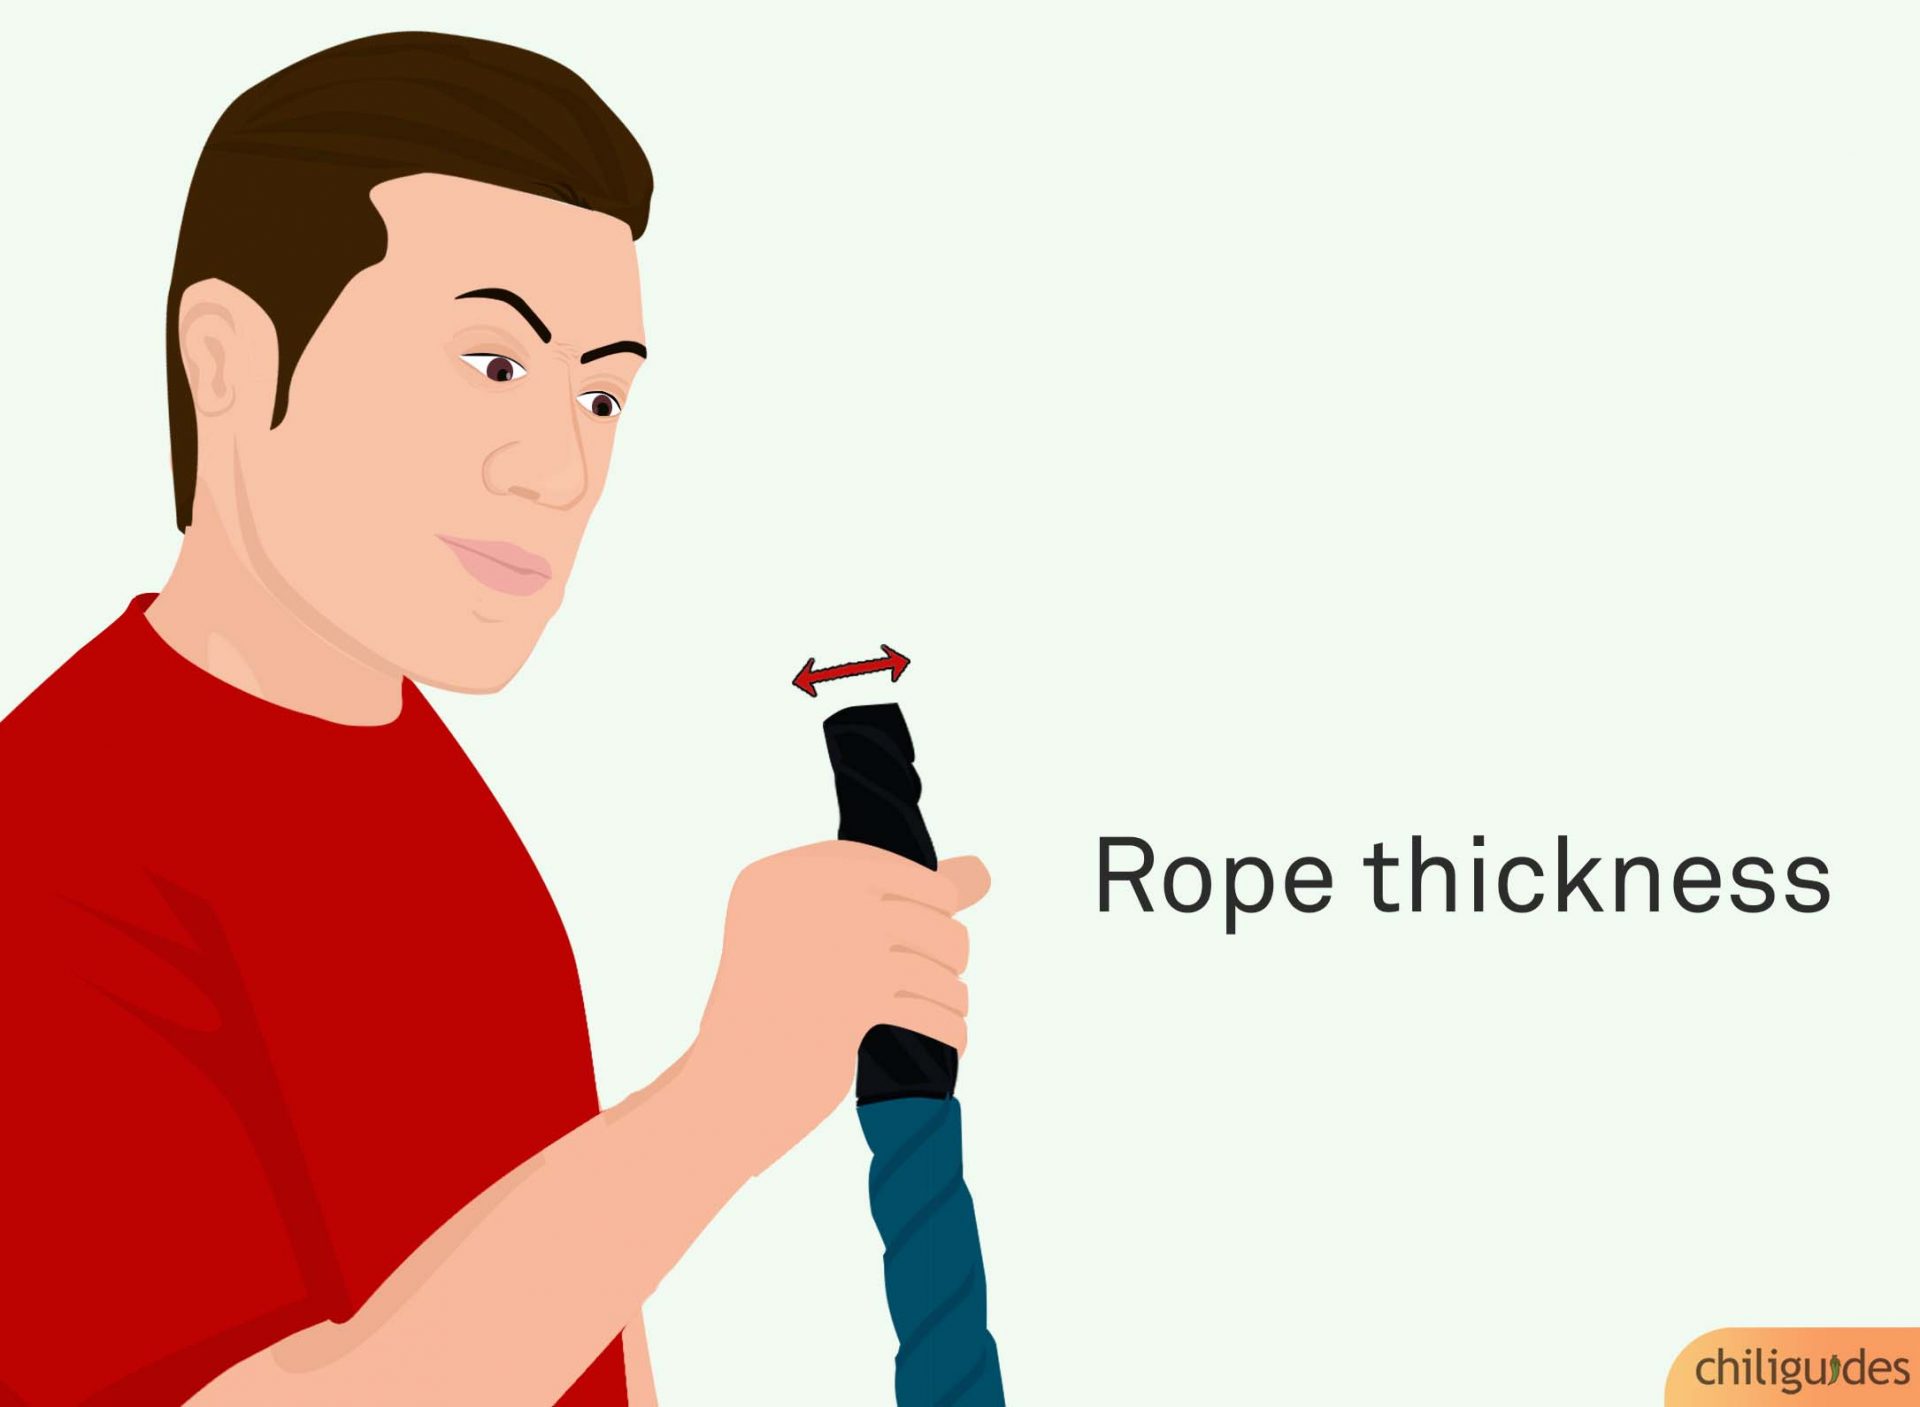 Beginners should not go for a rope over 1.5” in diameter.